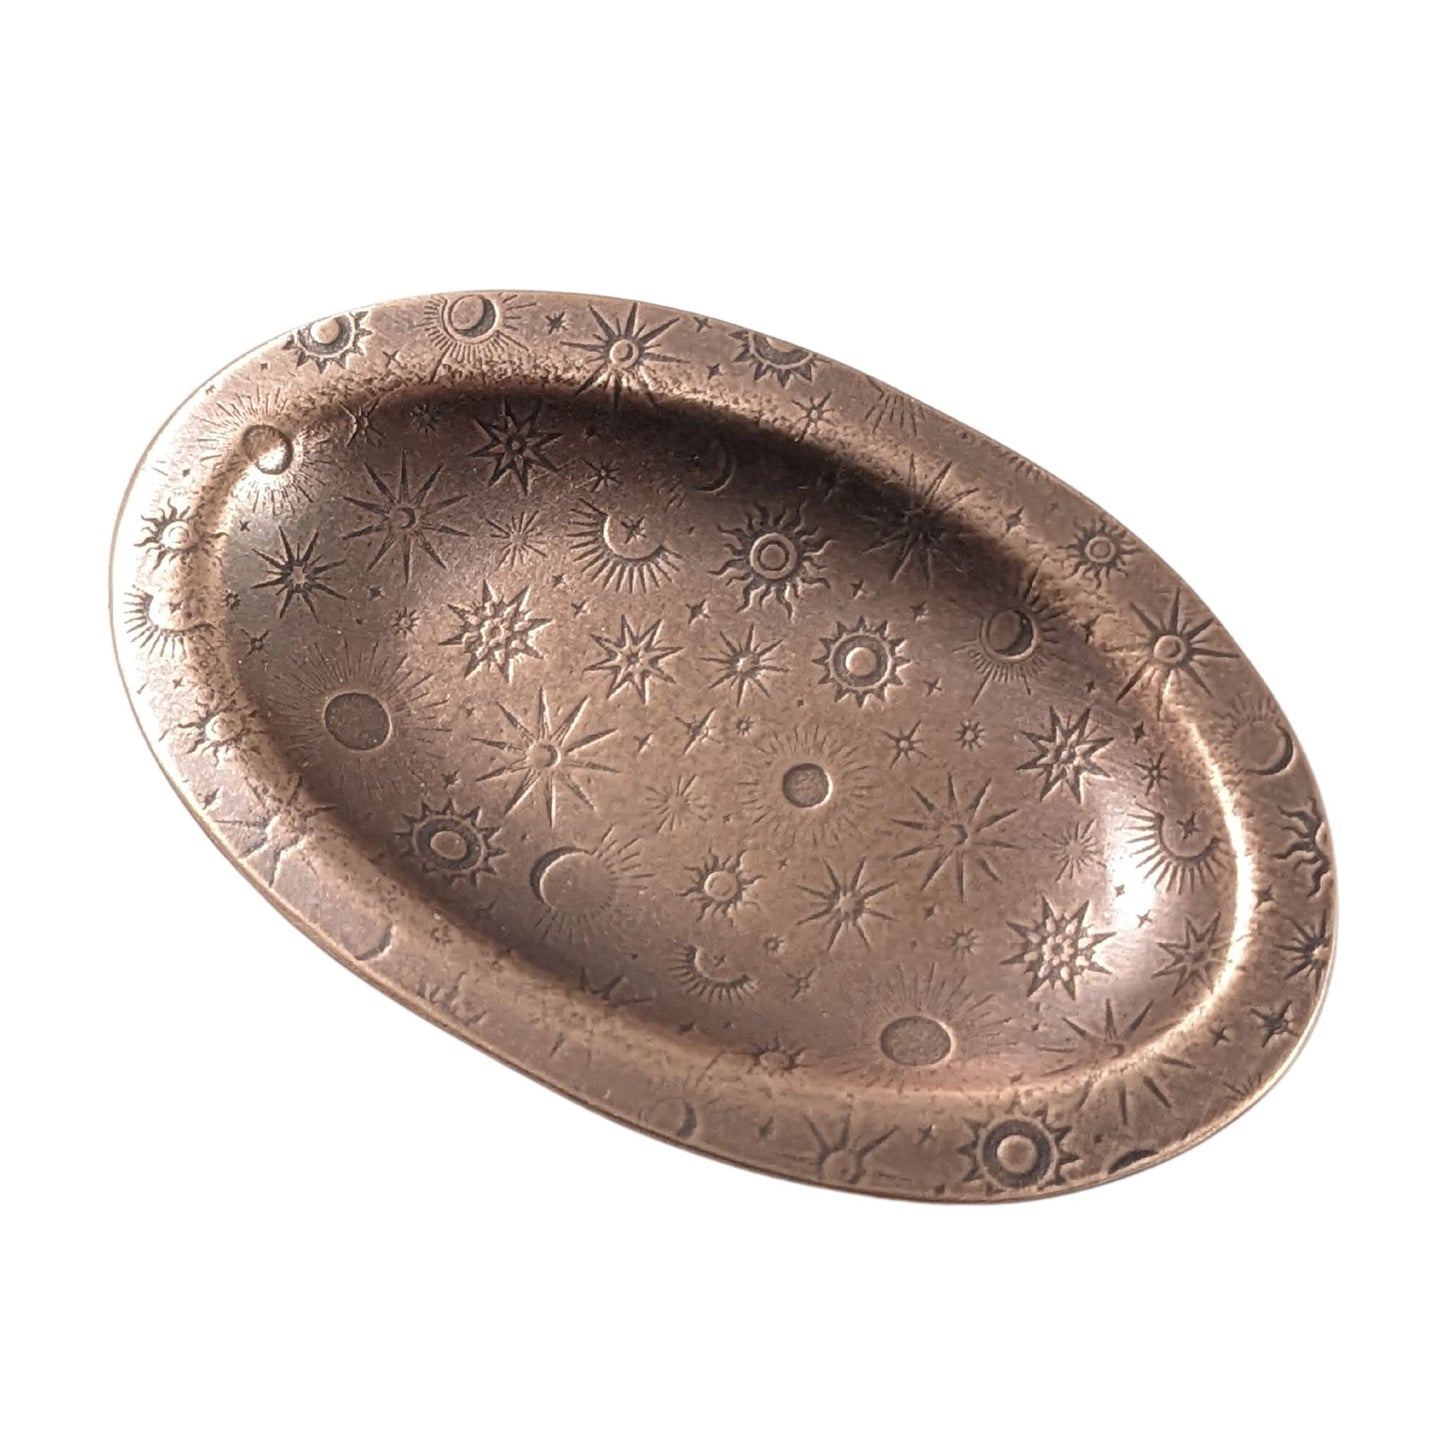 An oval copper ring dish with a raised edge. The dish has an impressed pattern of various star deisgns.